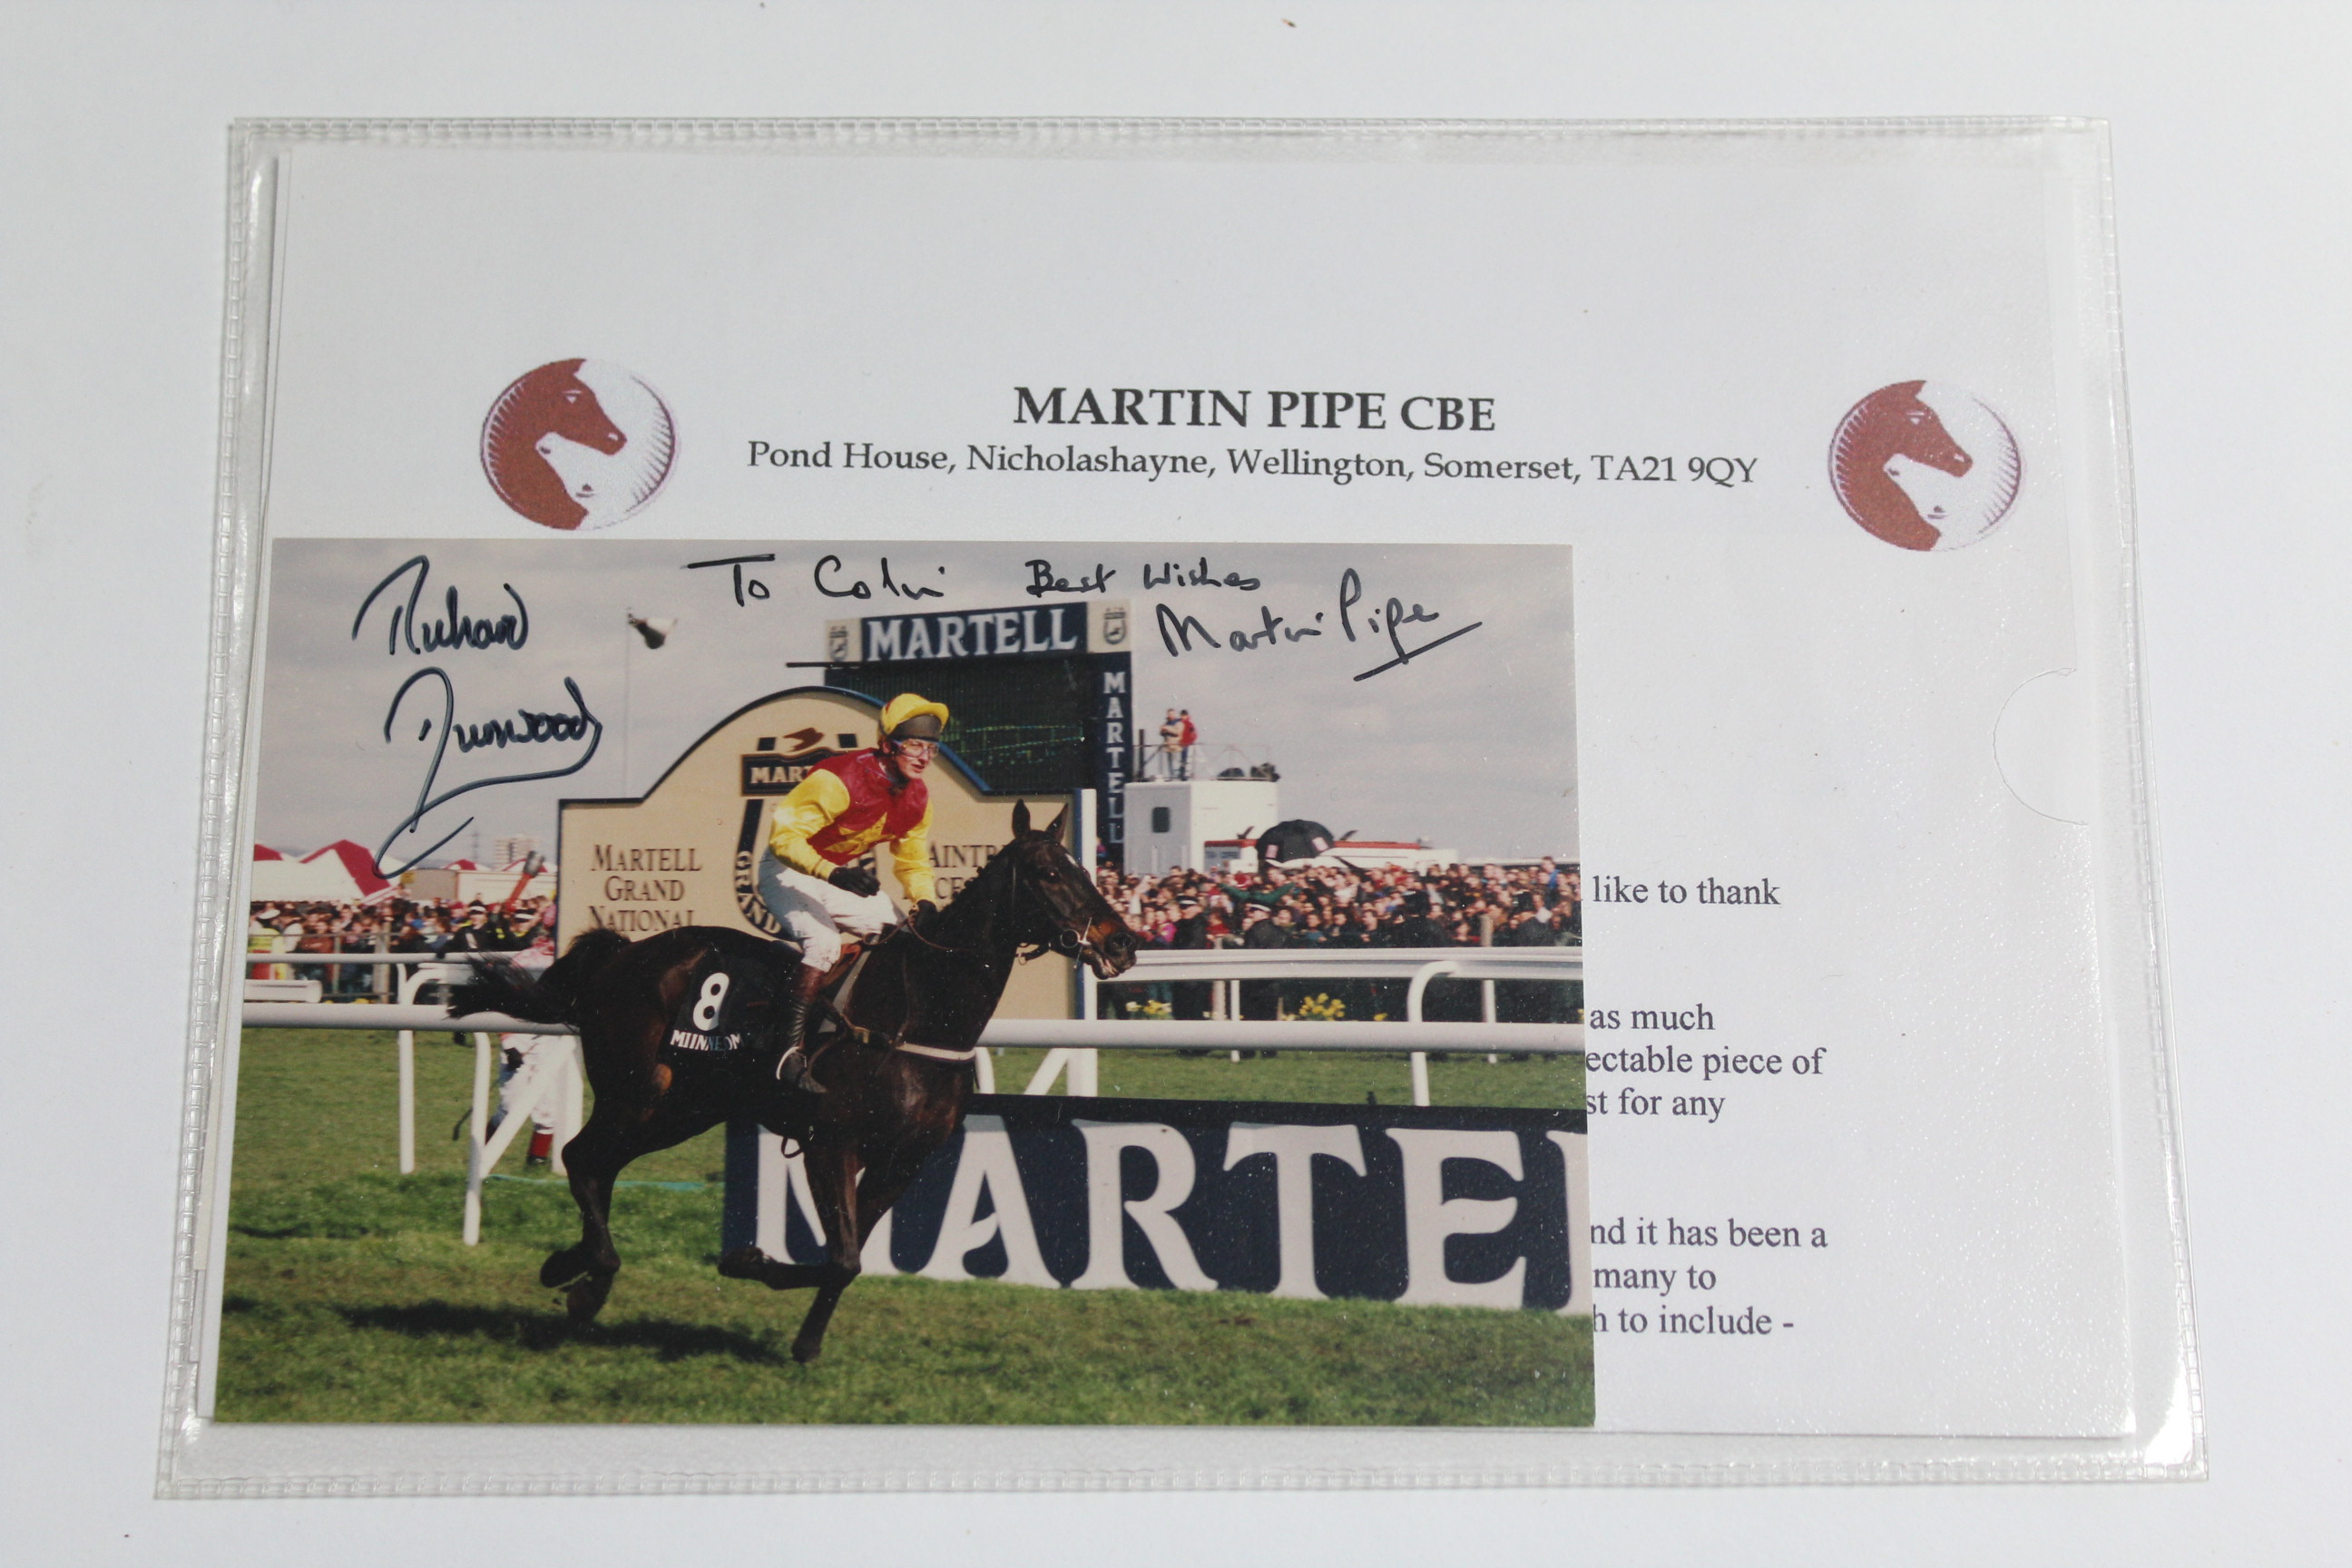 A Martin Pipe (racehorse trainer) collection set autographed by Martin Pipe & Richard Dunwoody.